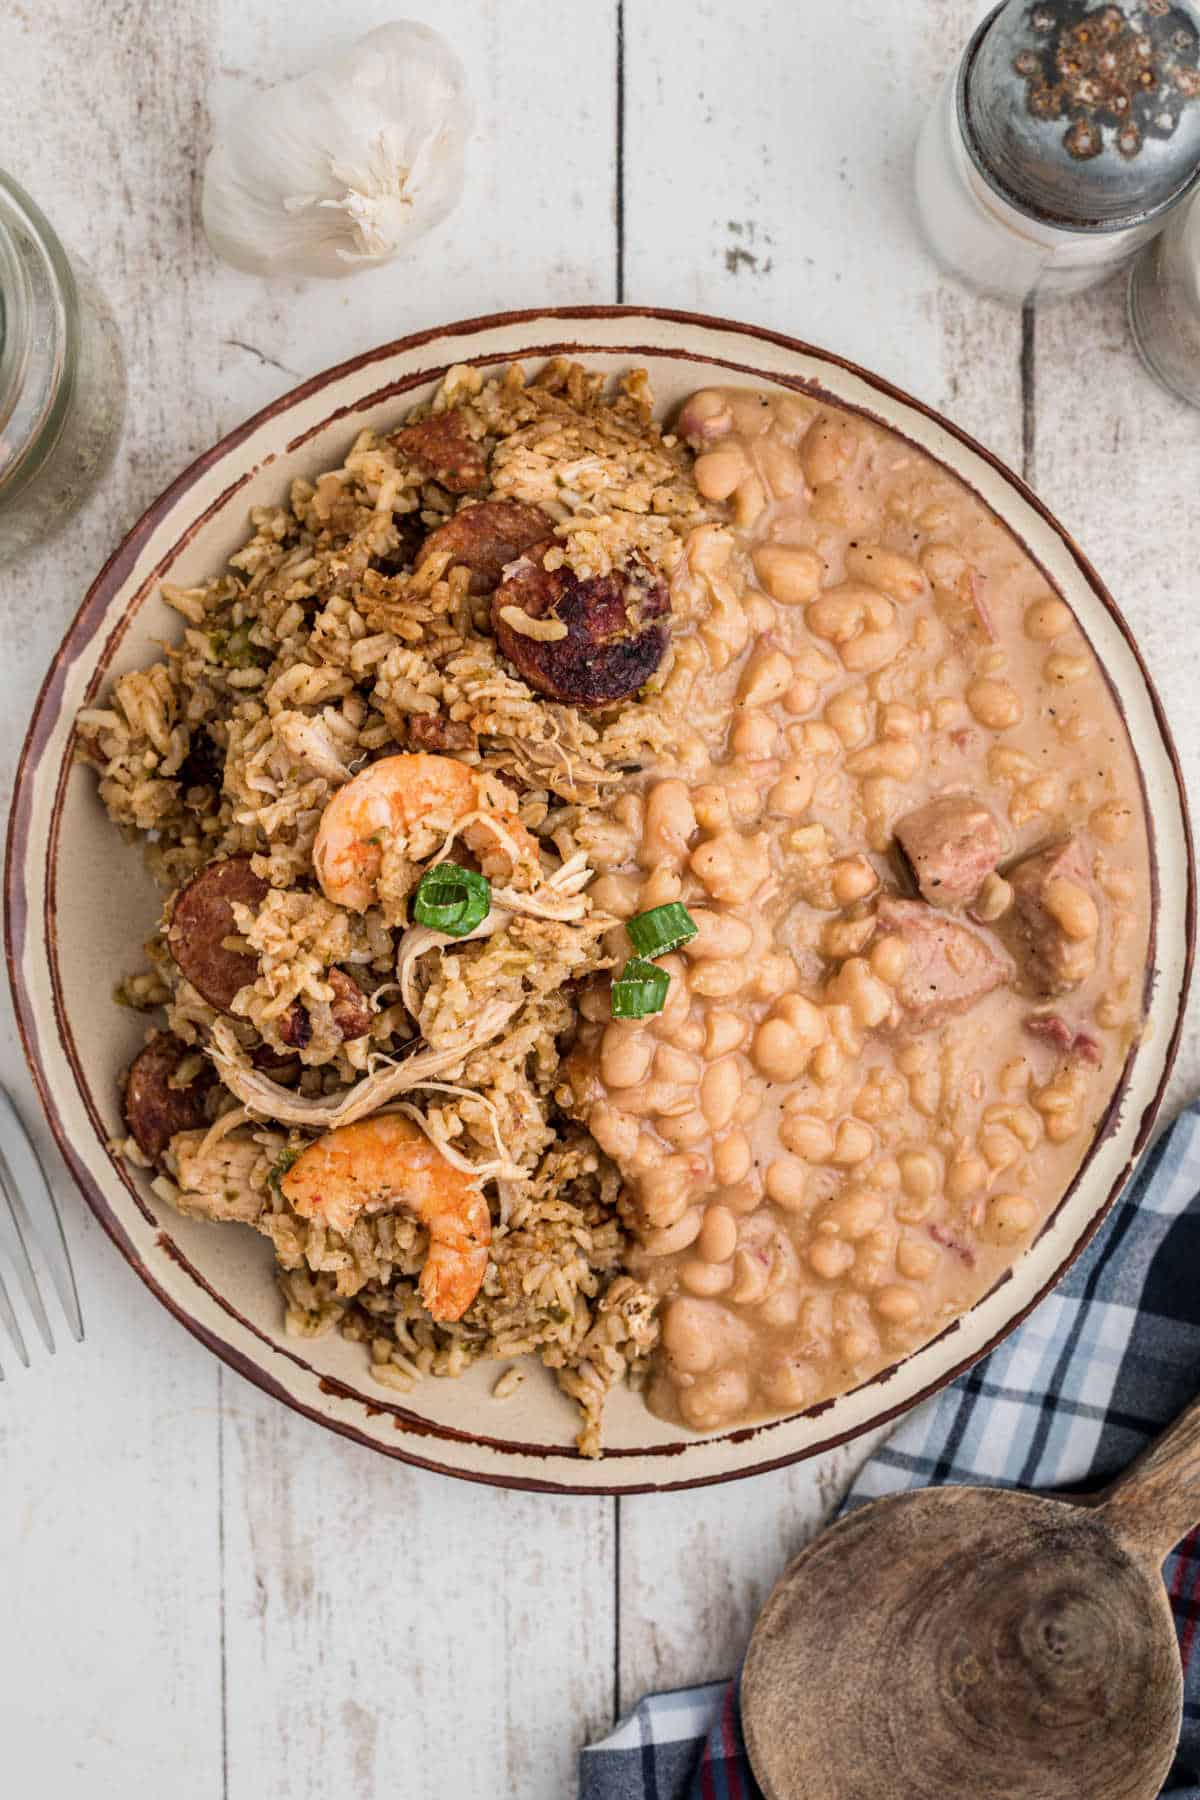 A dished out plate of Cajun Jambalaya with some white beans on the side.